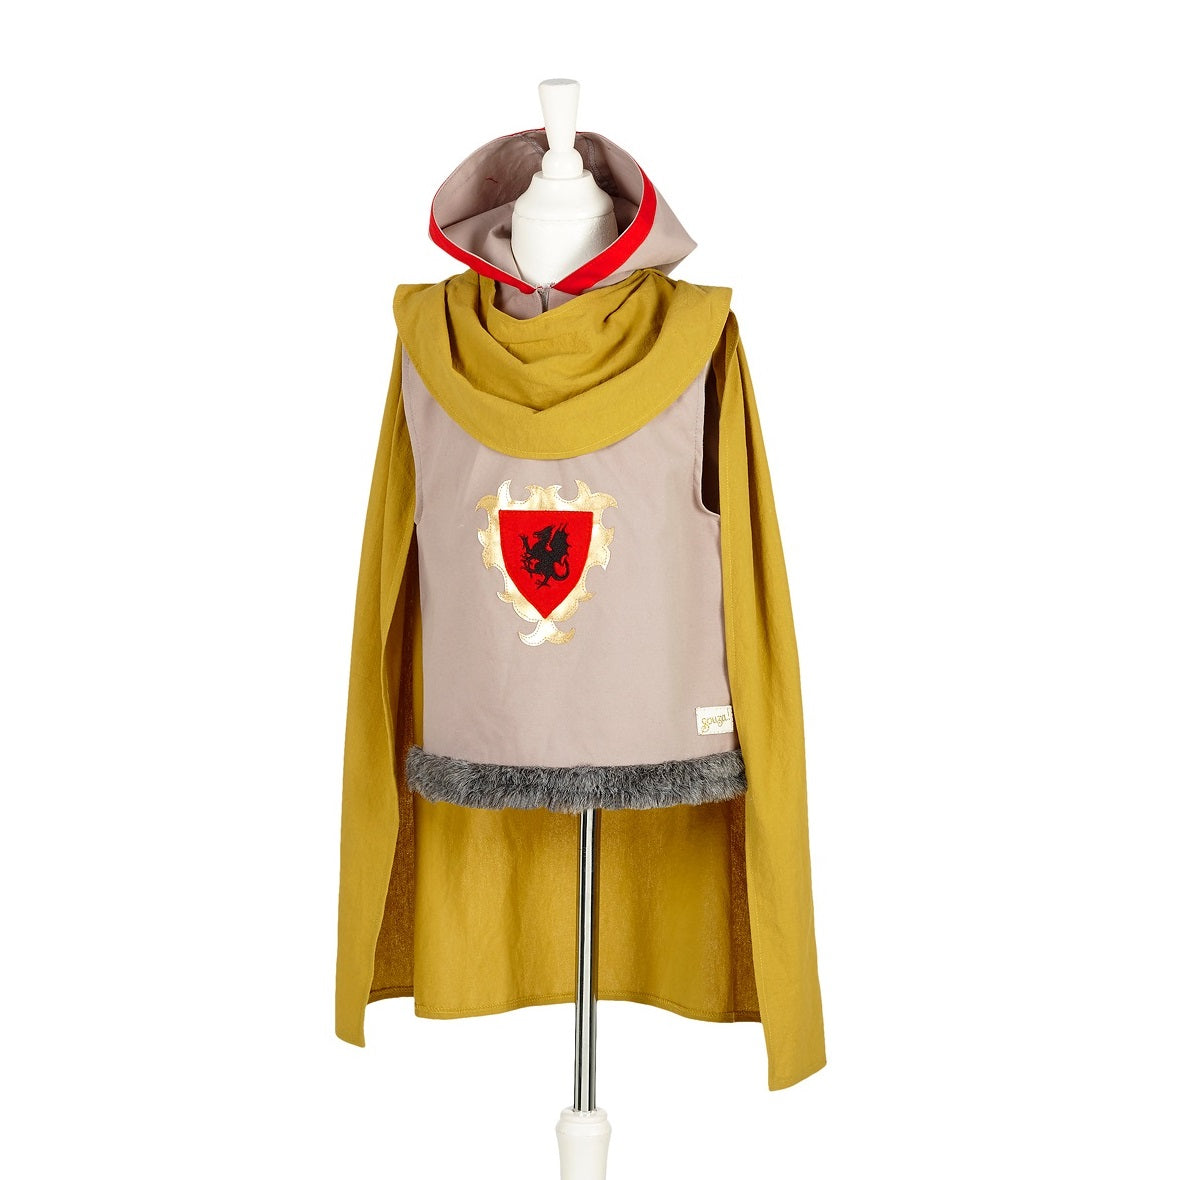 Souza!: Soft knightly armor with Marcus cape